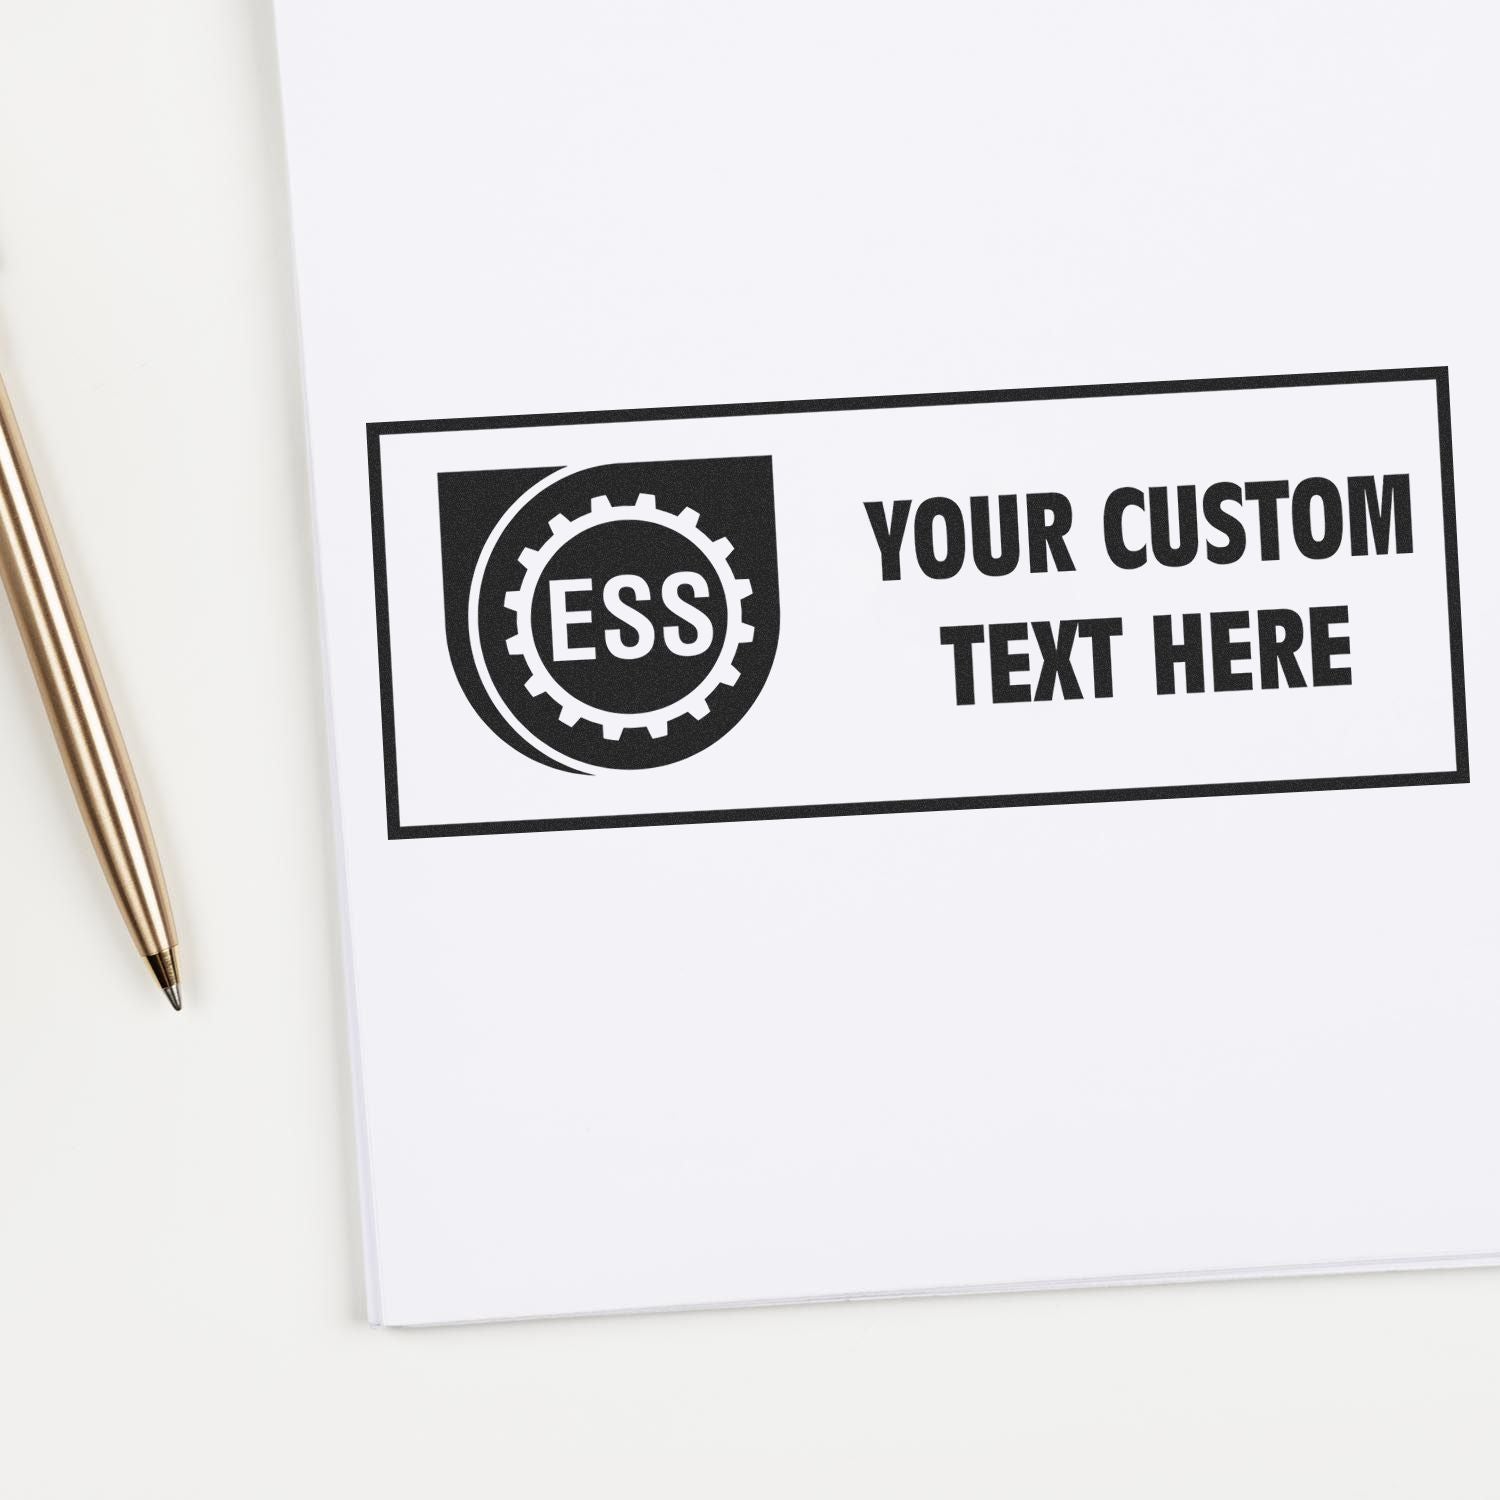 Choosing the Perfect Custom Rubber Stamps for Your Office Needs